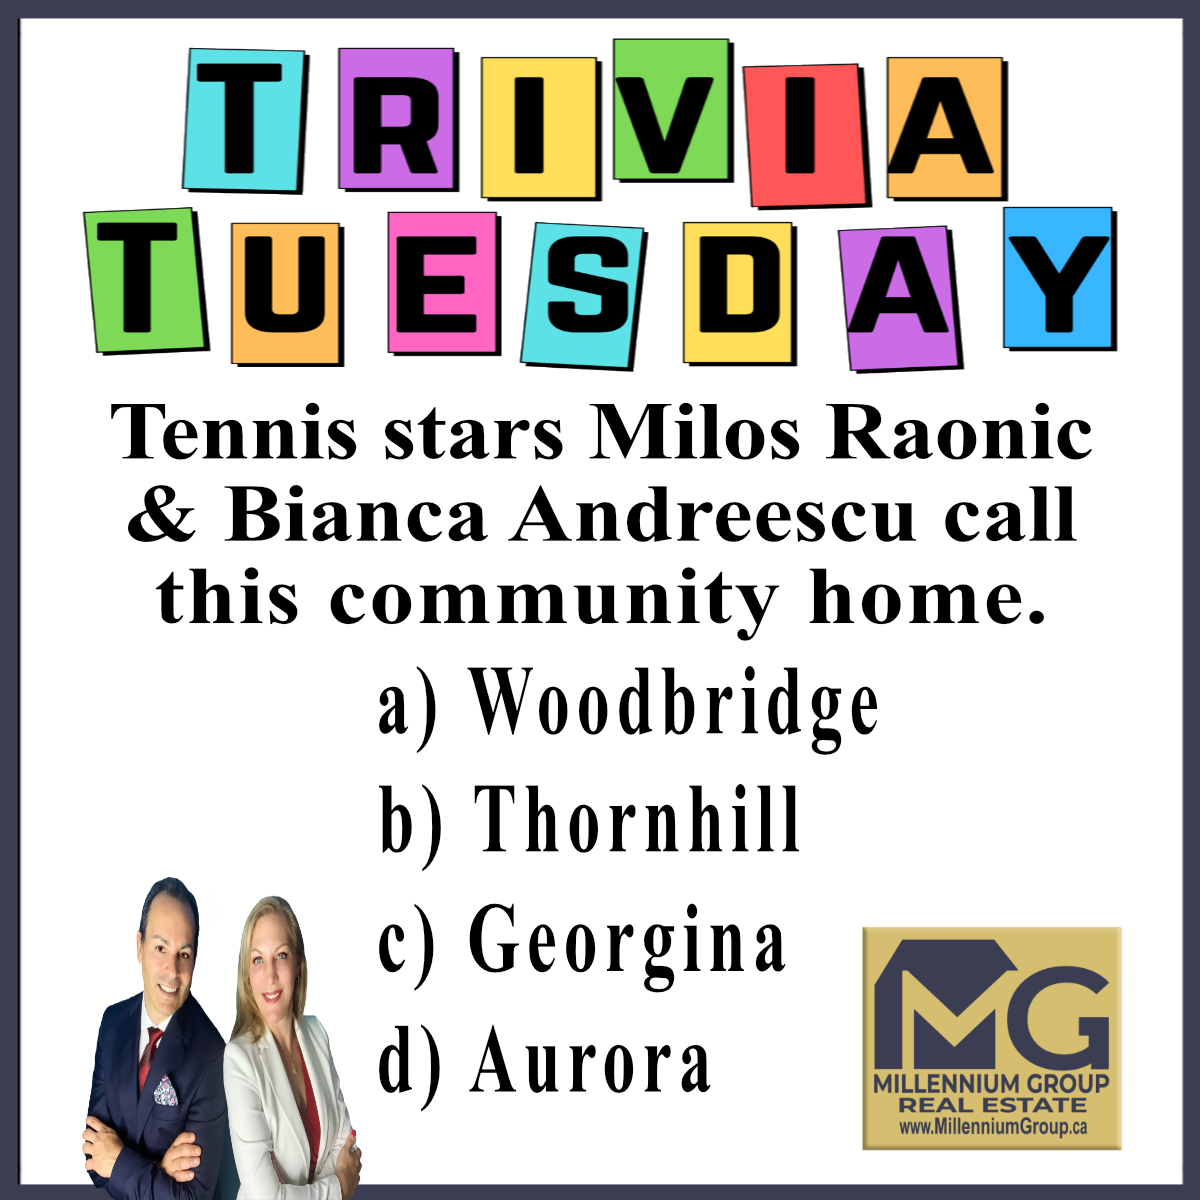 If you aim to have one of your children become a tennis champion, perhaps you should consider a move to this town! 🎾

#MilosRaonic #BiancaAndreescu #TennisCanada #TennisTrivia #NeighbourhoodTrivia #TriviaTuesday #TuesdayTrivia #KendraCutroneBroker #TonyCutroneRealtor #MGroupRE